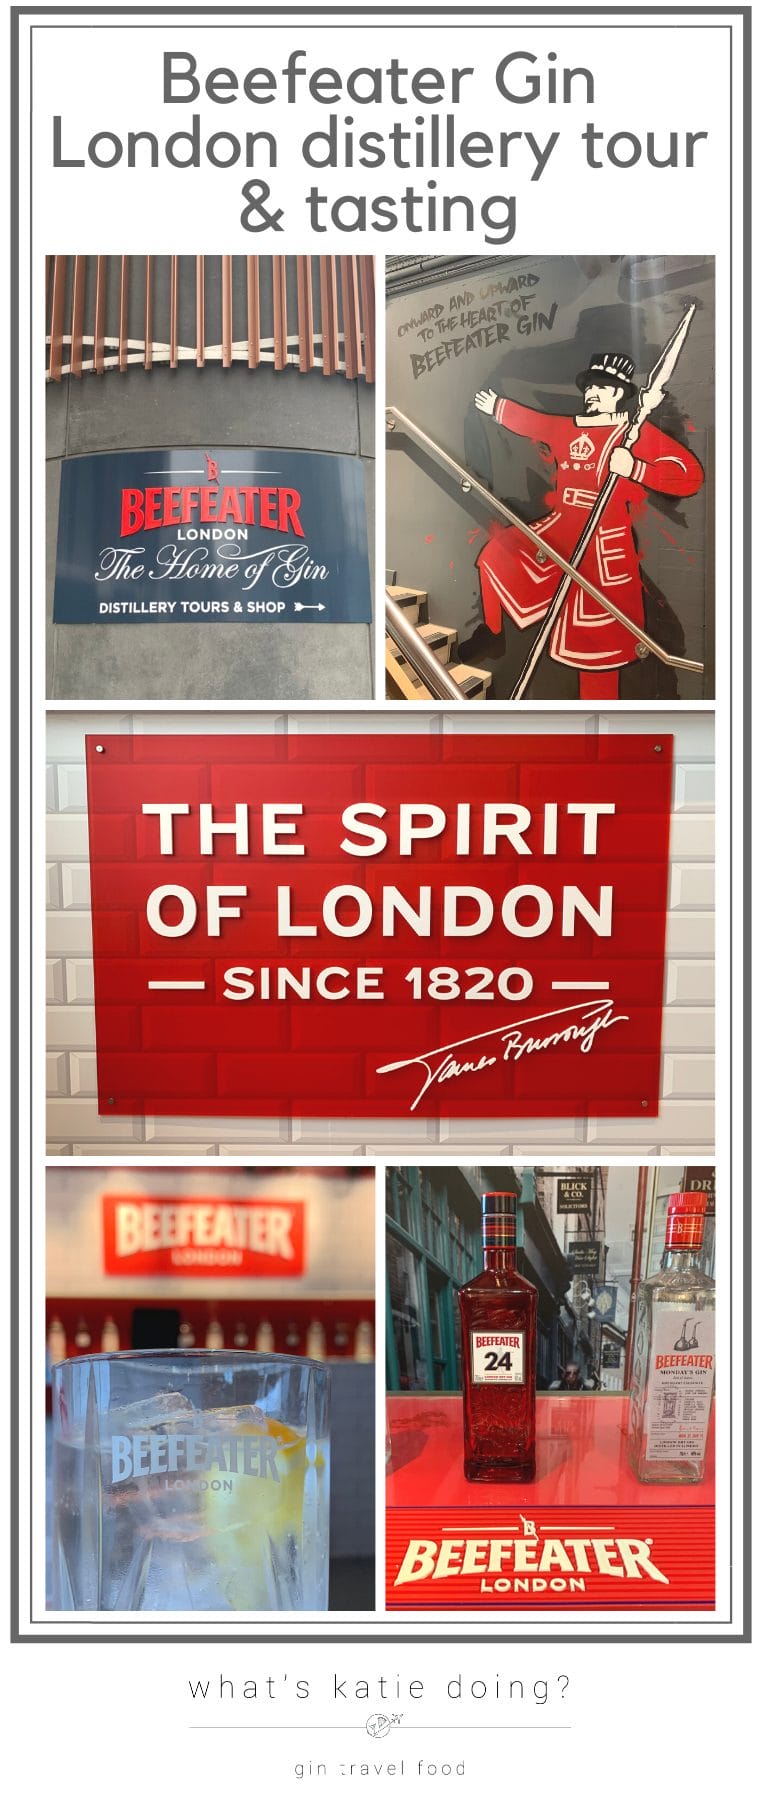 Beefeater gin tour - a London distillery tour and tasting